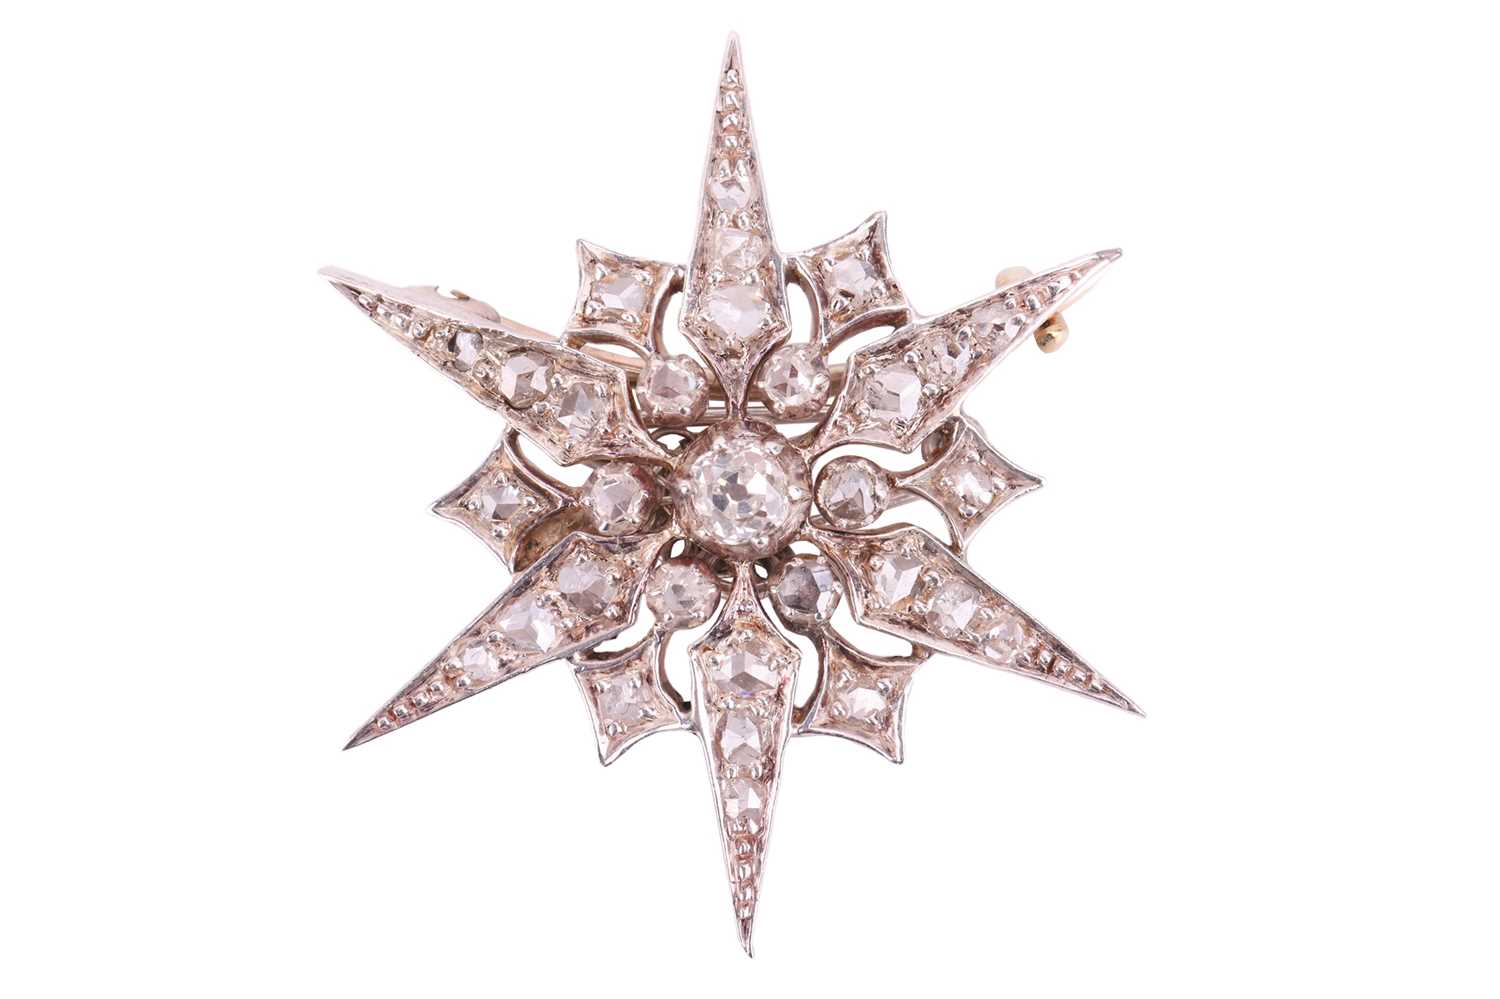 A Victorian star brooch, set throughout with diamonds, the largest central old-cut diamond measuring